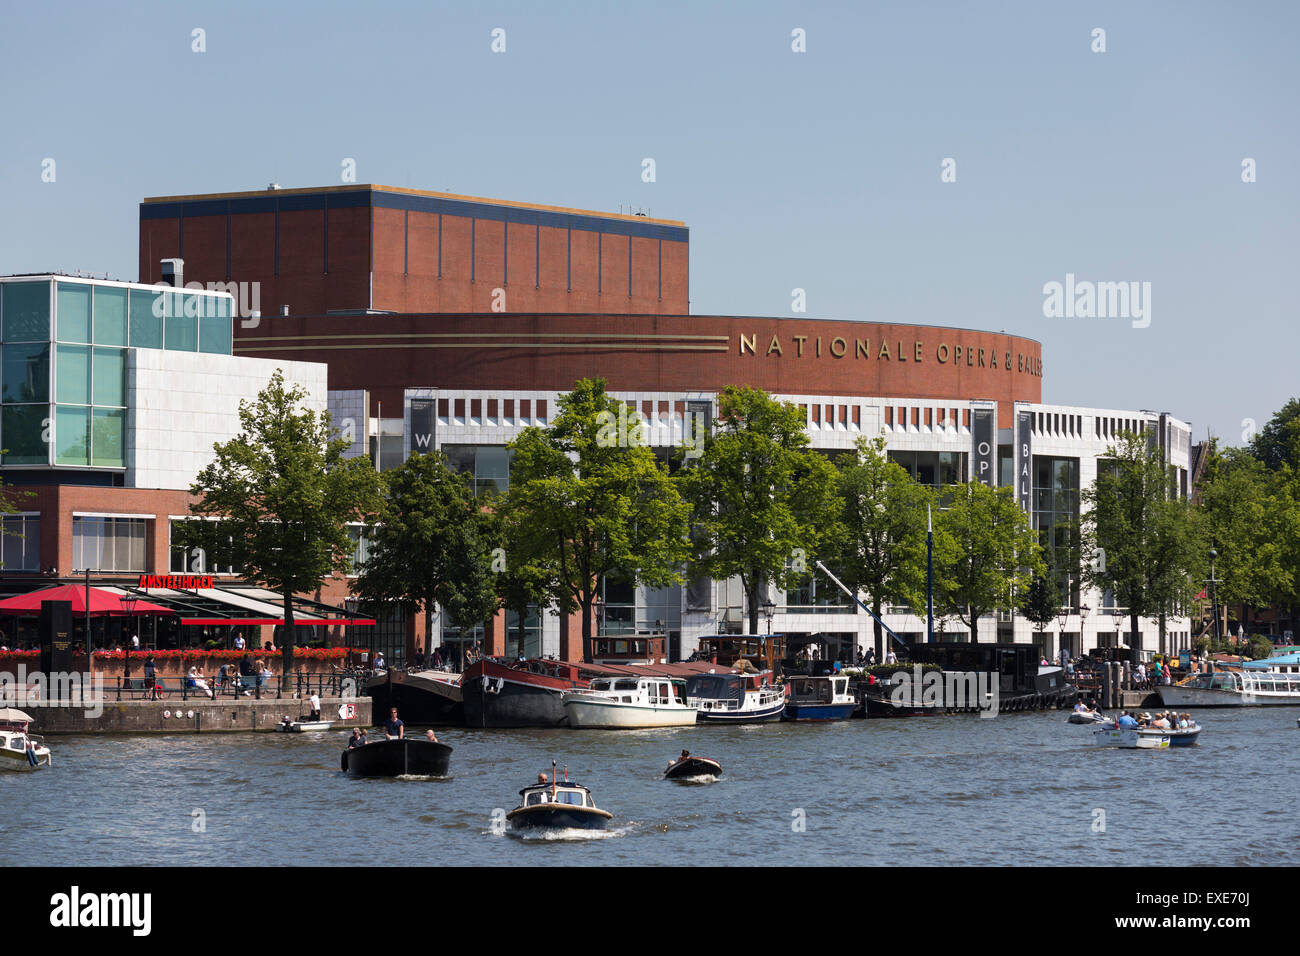 Building of the Nationale Opera & Ballet, Amsterdam, North Holland, The Netherlands Stock Photo